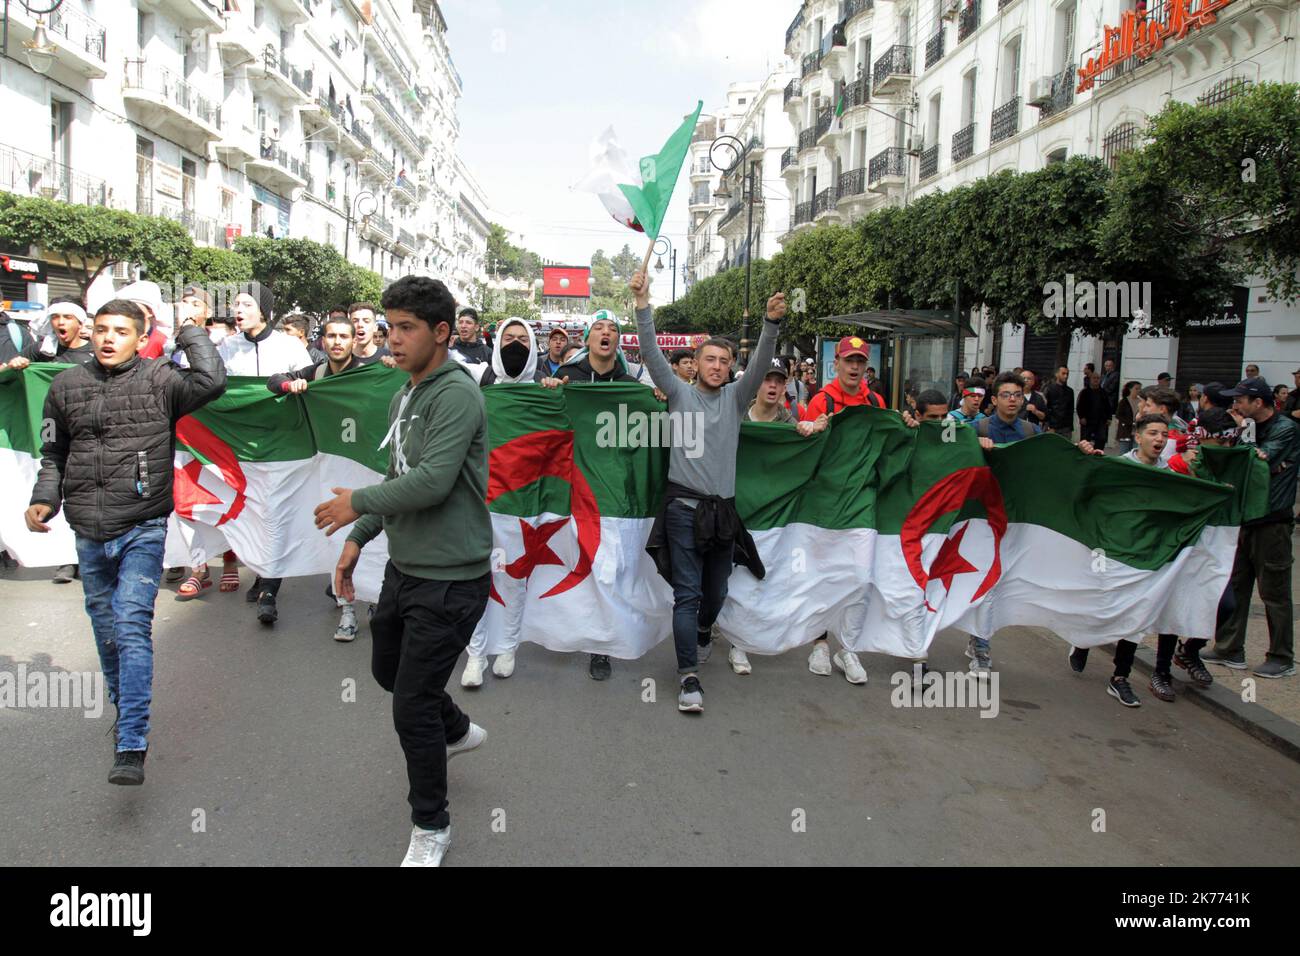 Collegians and high school students demonstrate in Algiers in front of the big post against the candidature of Abdelaziz Bouteflika for a fifth term in the presidential election©Adel Sherei/Wostok Press/Maxppp Alger, Algerie, 10/03/2019 Collegians and high school students demonstrate in Algiers in front of the big post against the candidature of Abdelaziz Bouteflika for a fifth term in the presidential election Stock Photo